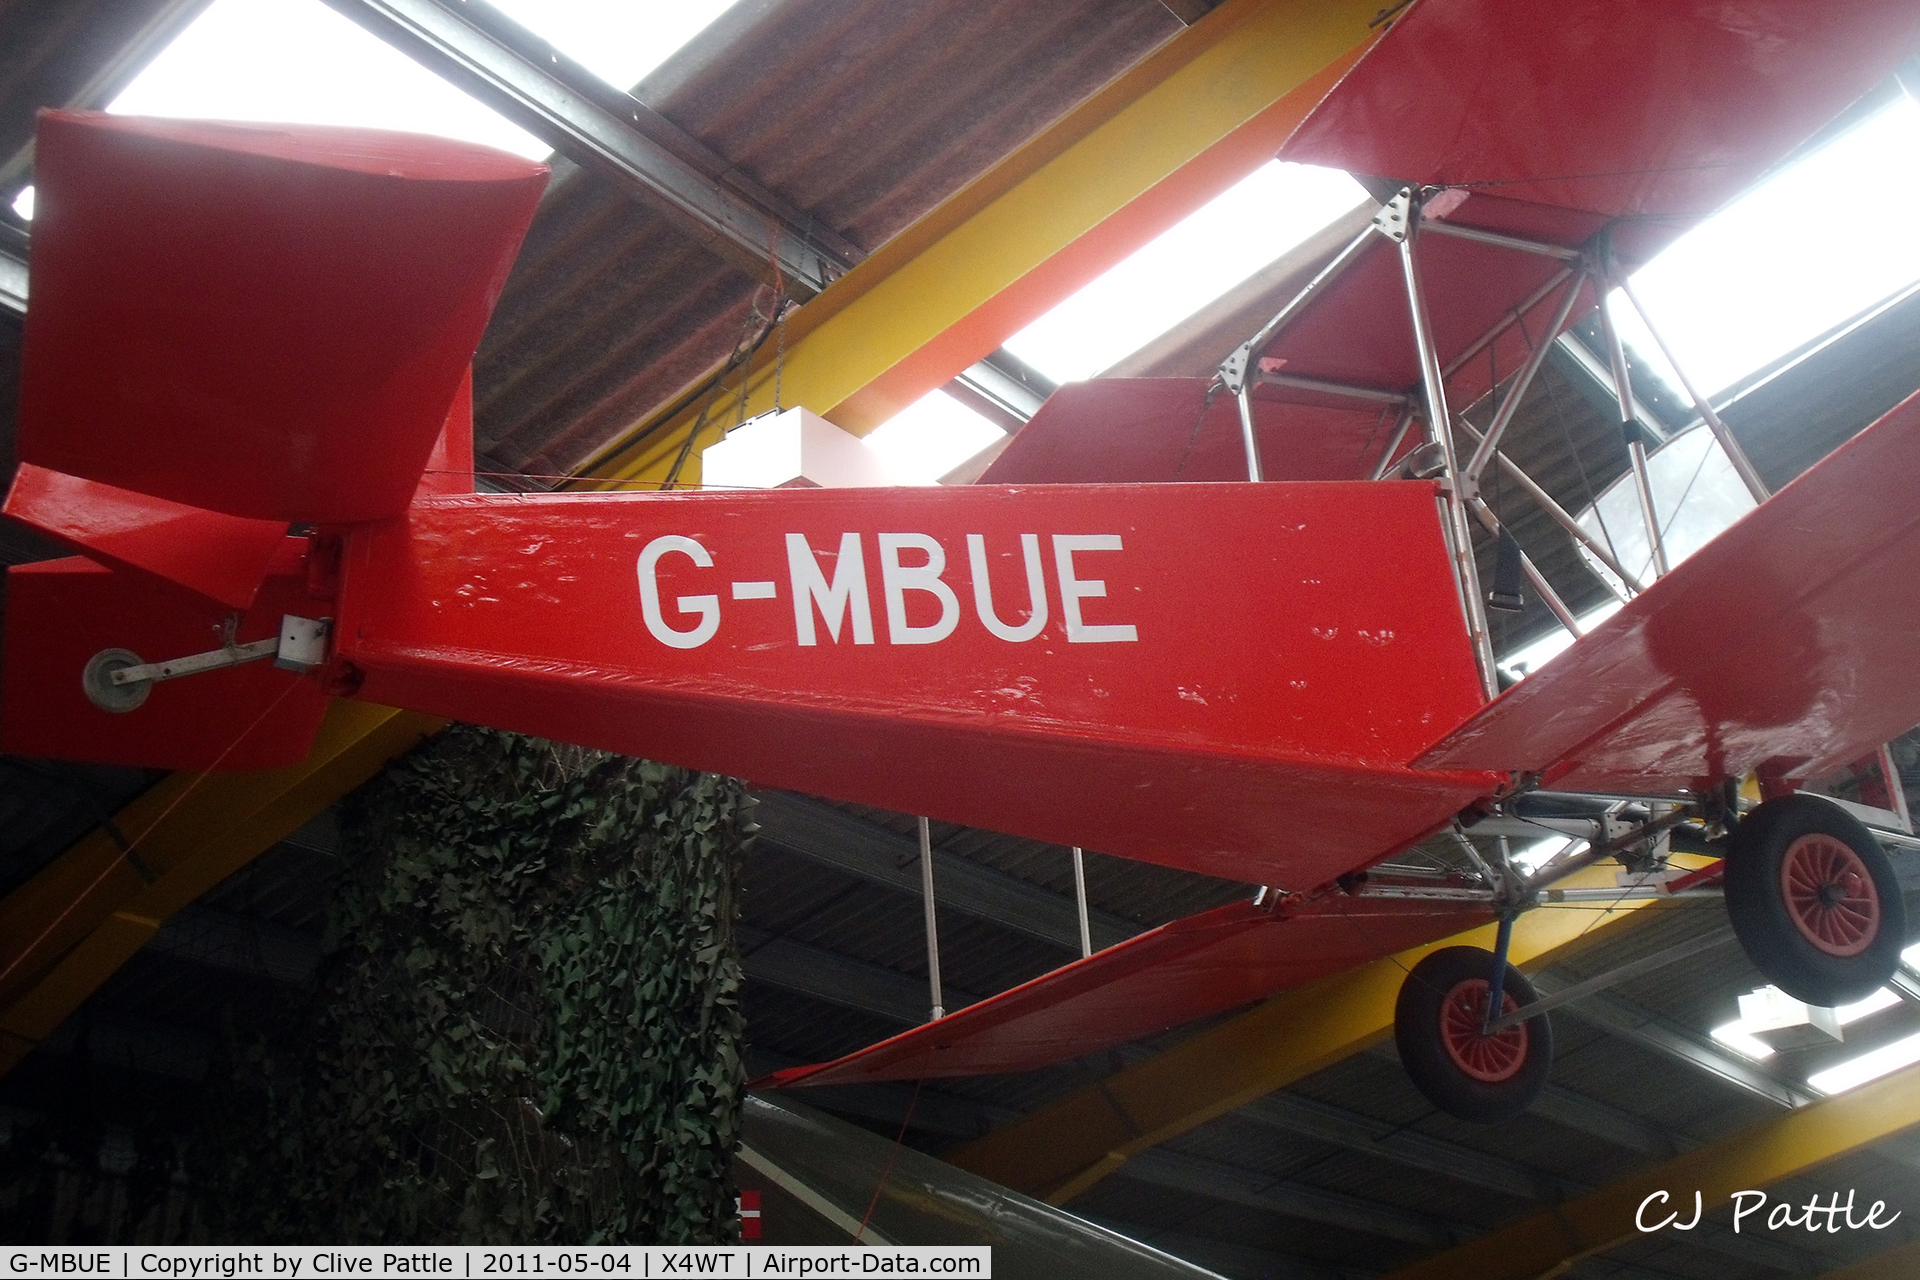 G-MBUE, Micro Biplane Aviation Tiger Cub 440 C/N MBA-001, Preserved at the Newark Air Museum, Winthorpe, Nottinghamshire. X4WT